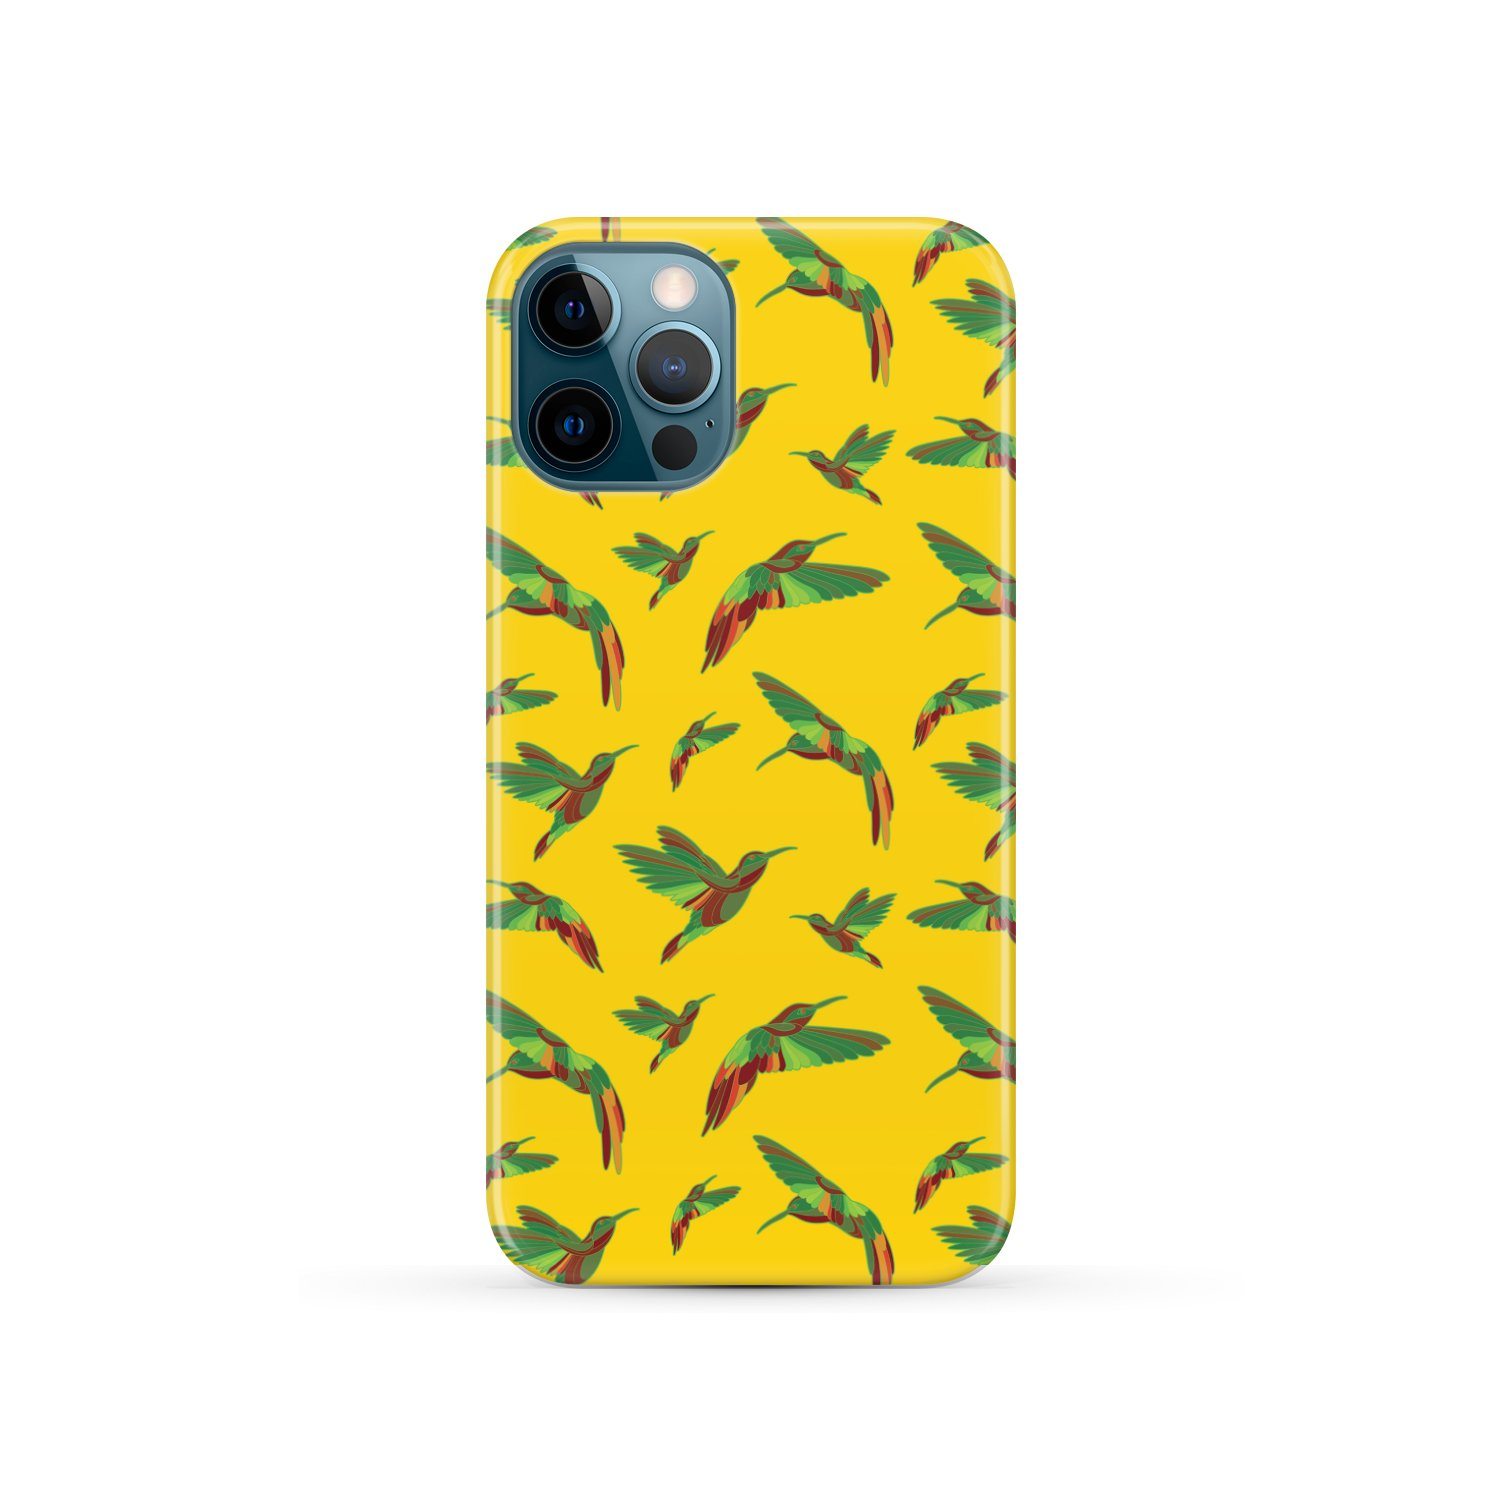 Red Swift Yellow Phone Case Phone Case wc-fulfillment iPhone 12 Pro 